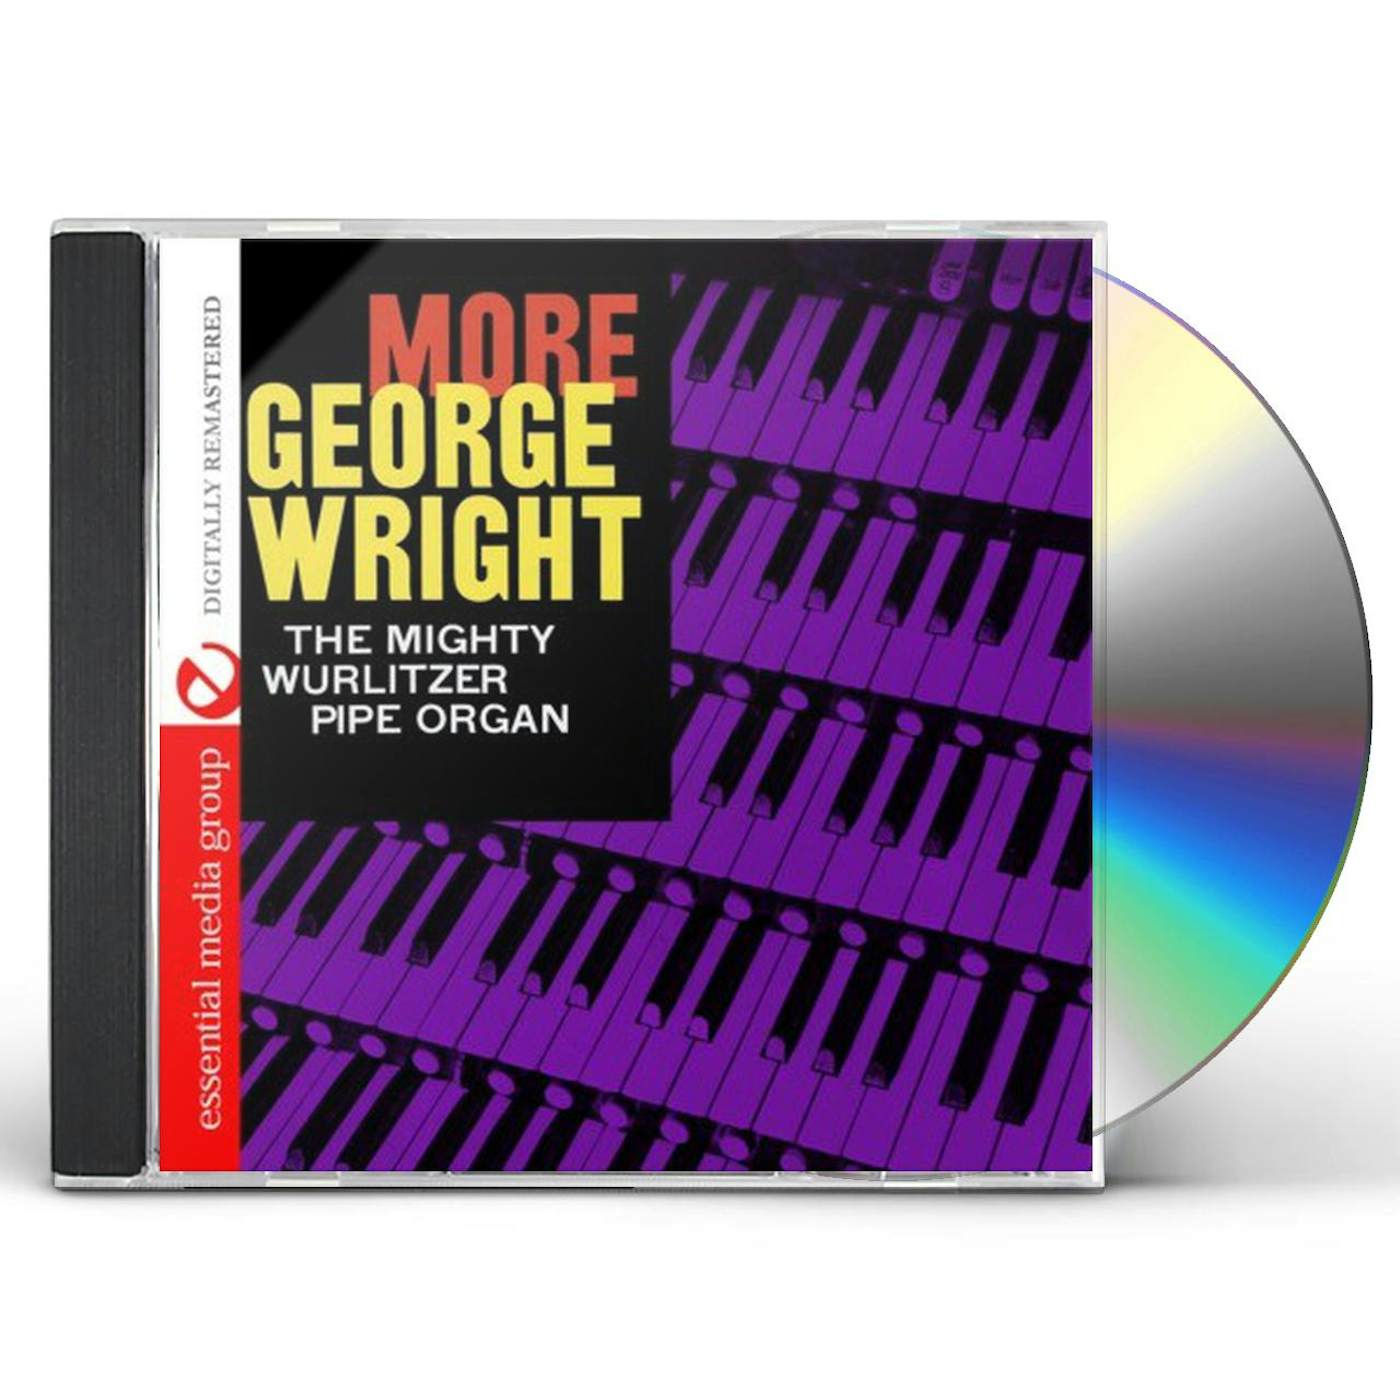 MORE GEORGE WRIGHT CD